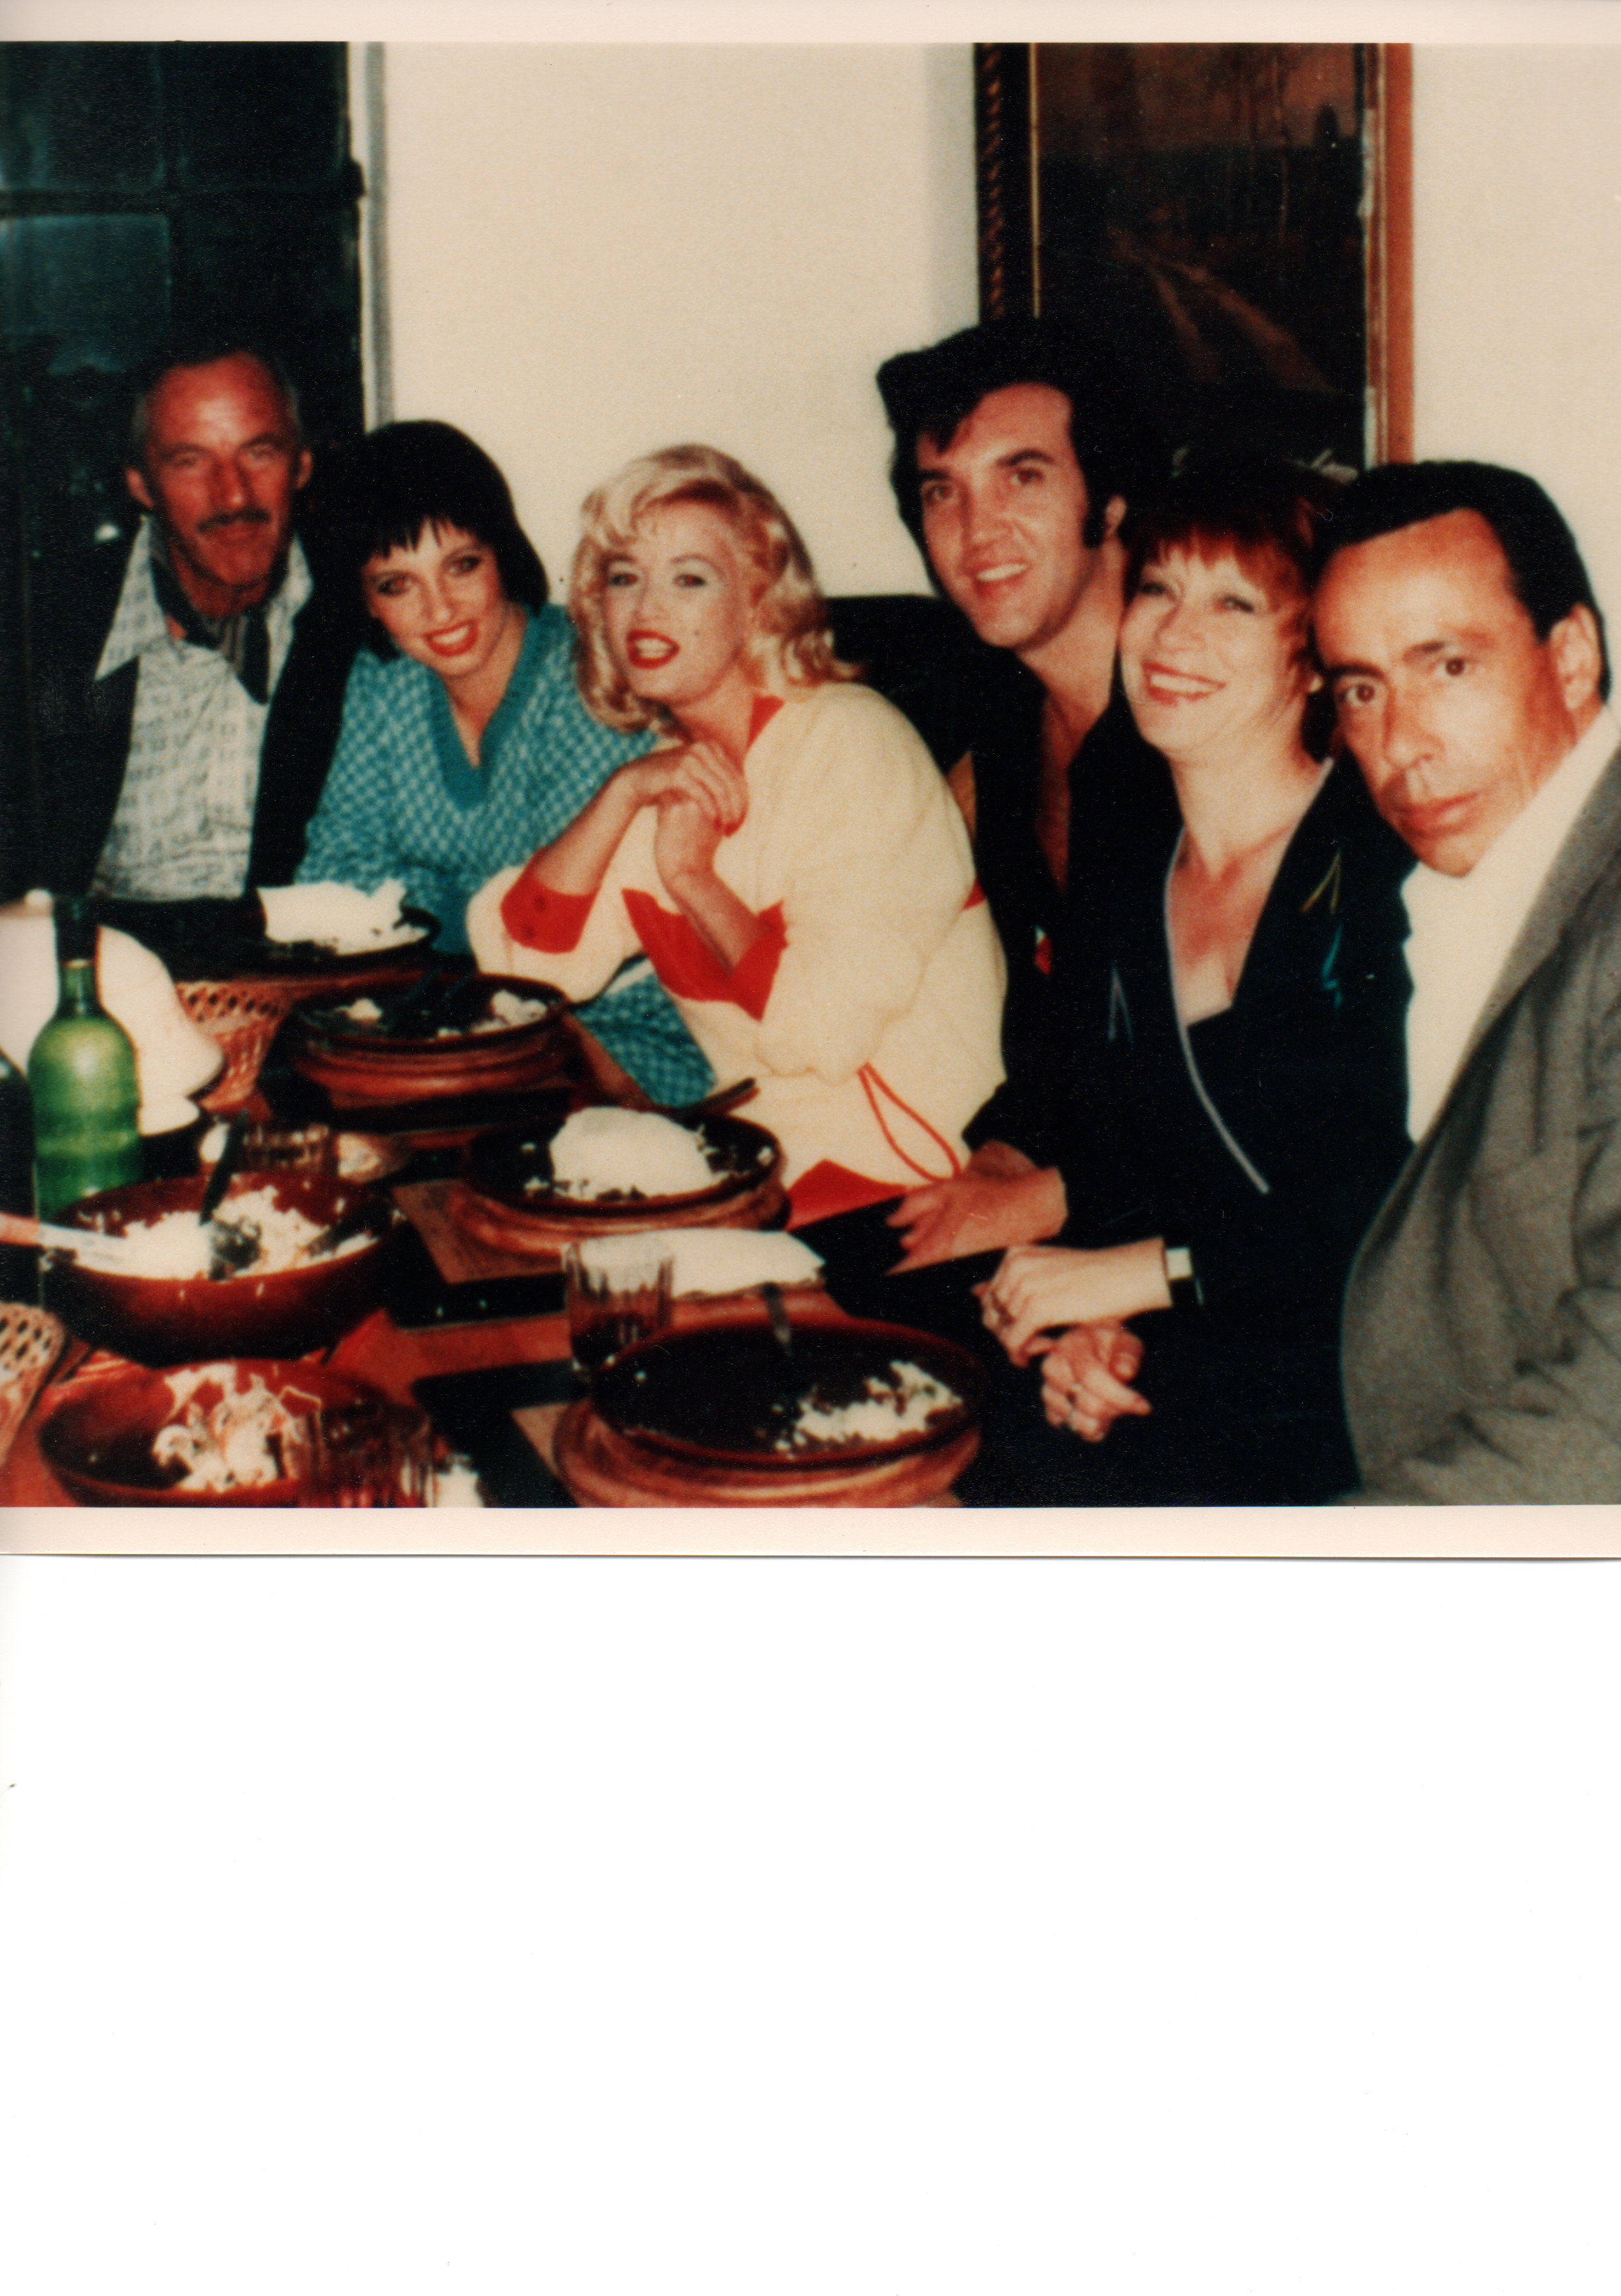 Lindy in German cigarette TV commercial with lookalikes as L-R: David Niven, Liza Minelli, Marilyn Monroe, Elvis, Shirley Maclean & Humphrey Bogart.